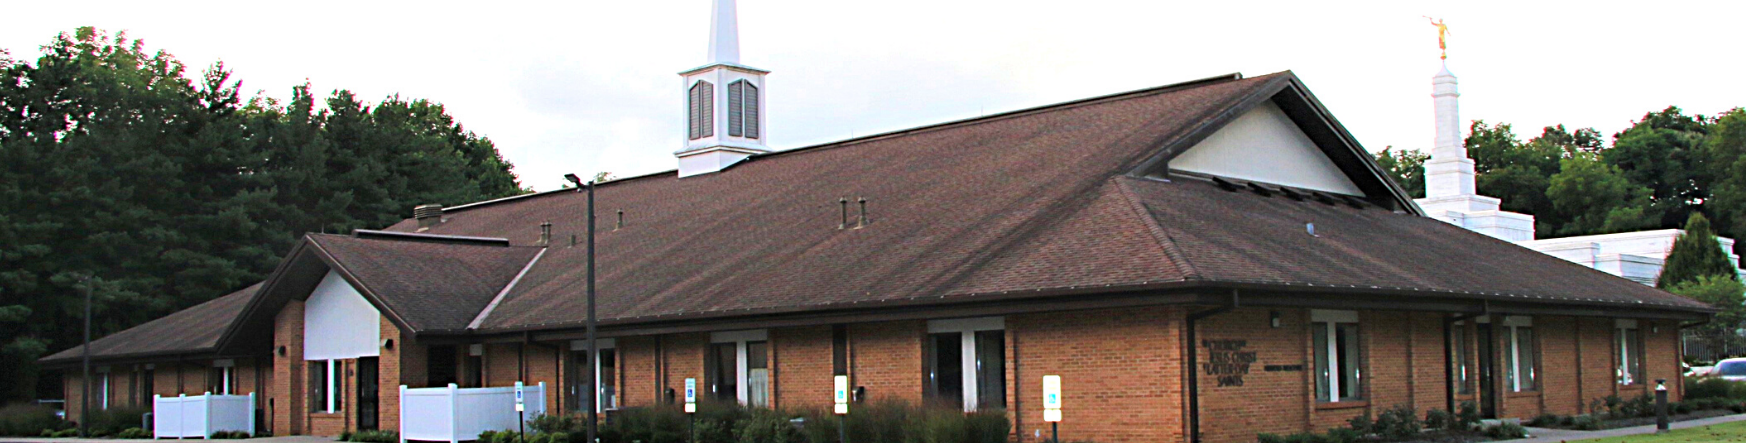 Another exterior shot of christian church at 7116 W. Highway 22, Crestwood, KY (The Church of Jesus Christ of Latter-day Saints)